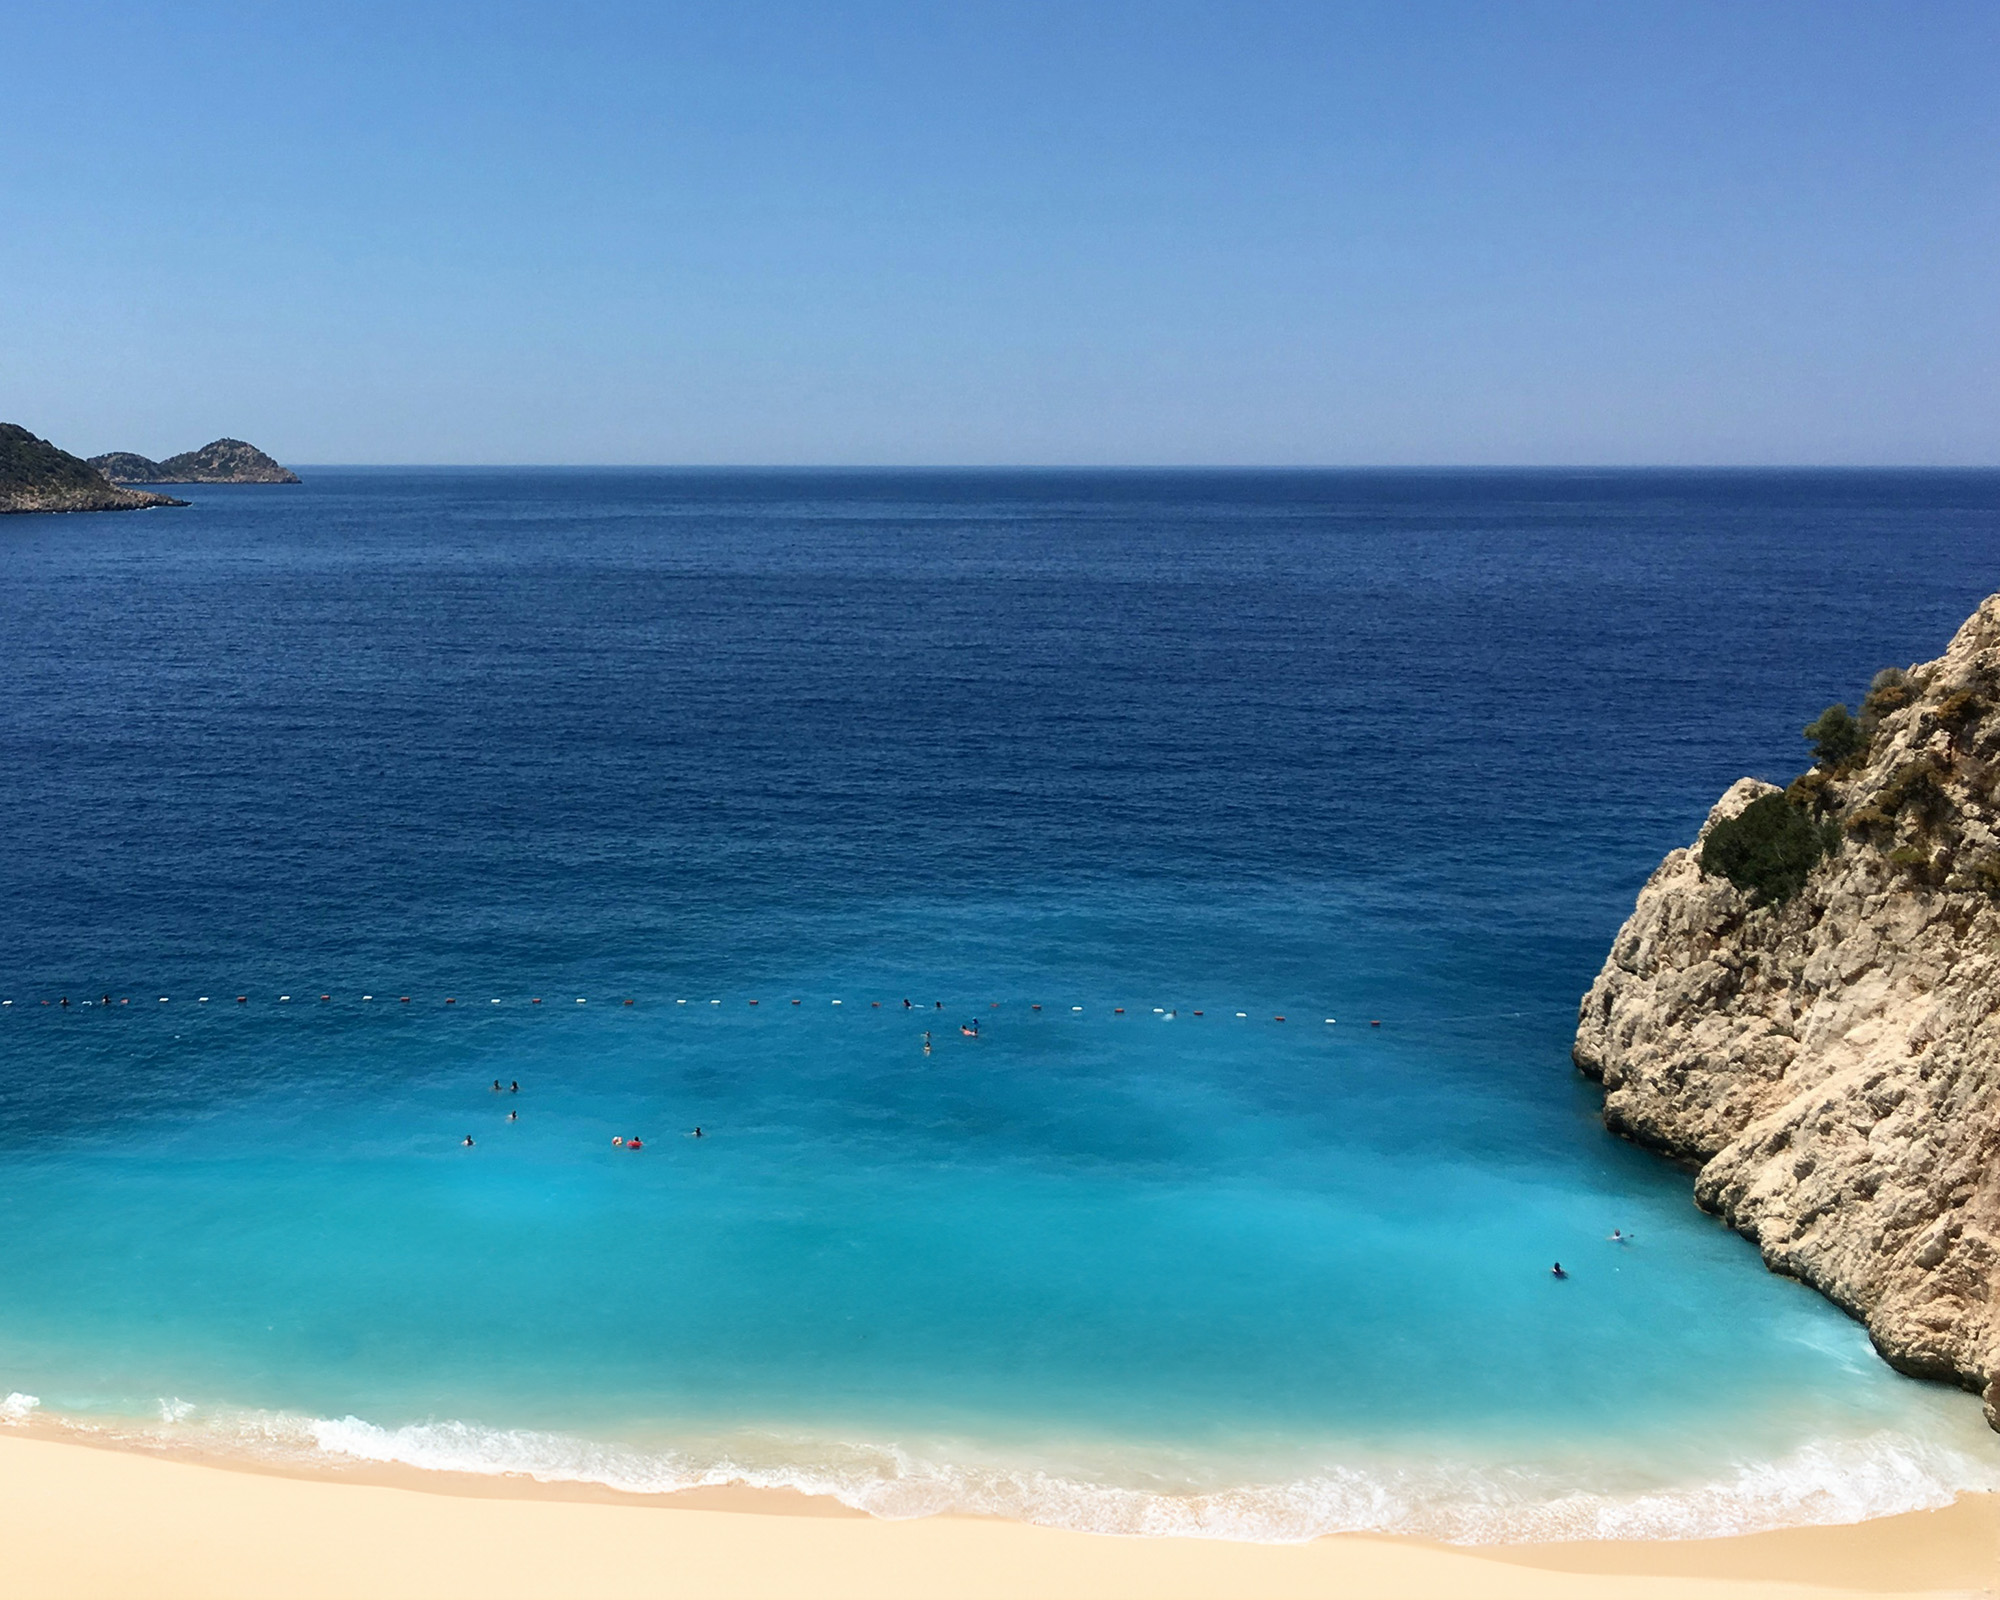 Cala Goloritzé is a UNESCO World Heritage site known for its pristine beach